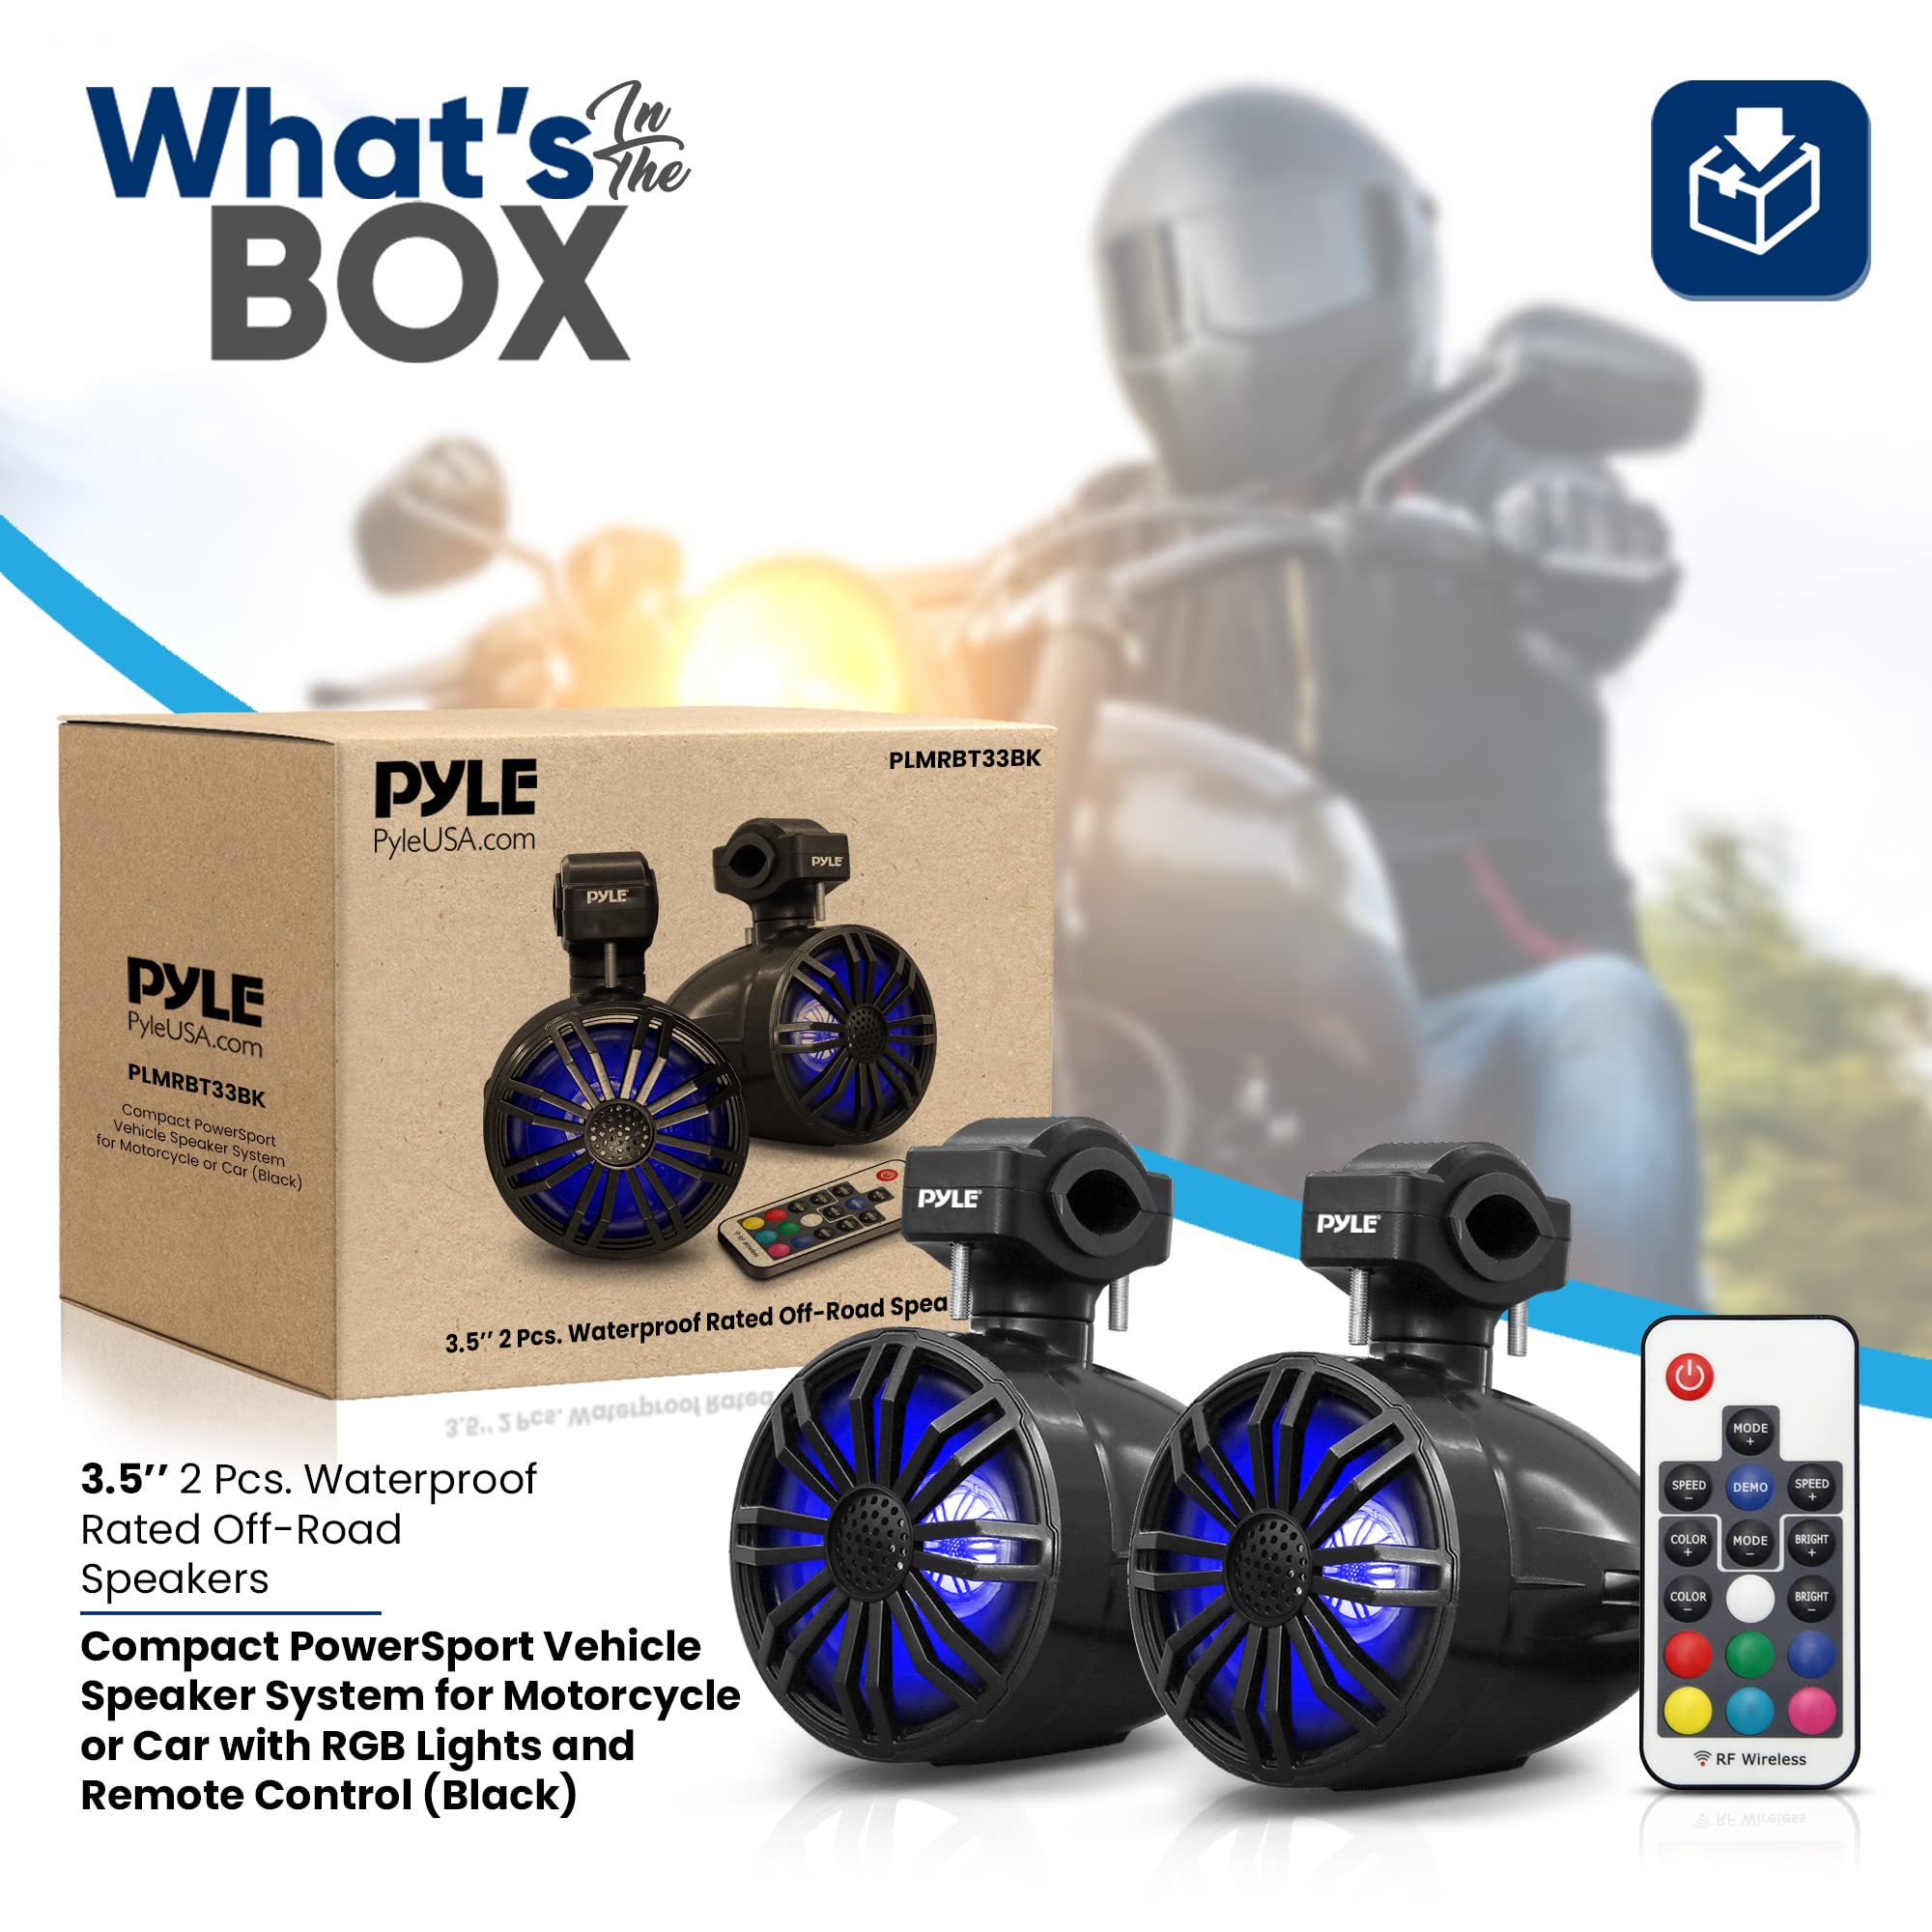 Pyle Bluetooth Waterproof Off-Road Speakers - 3.5” 40W Marine Grade Woofer Sound System w/RGB Light, Full Range Outdoor Audio Stereo Speaker for Motorcycle, ATV, Jeep, Boat, Includes Brackets (Black)